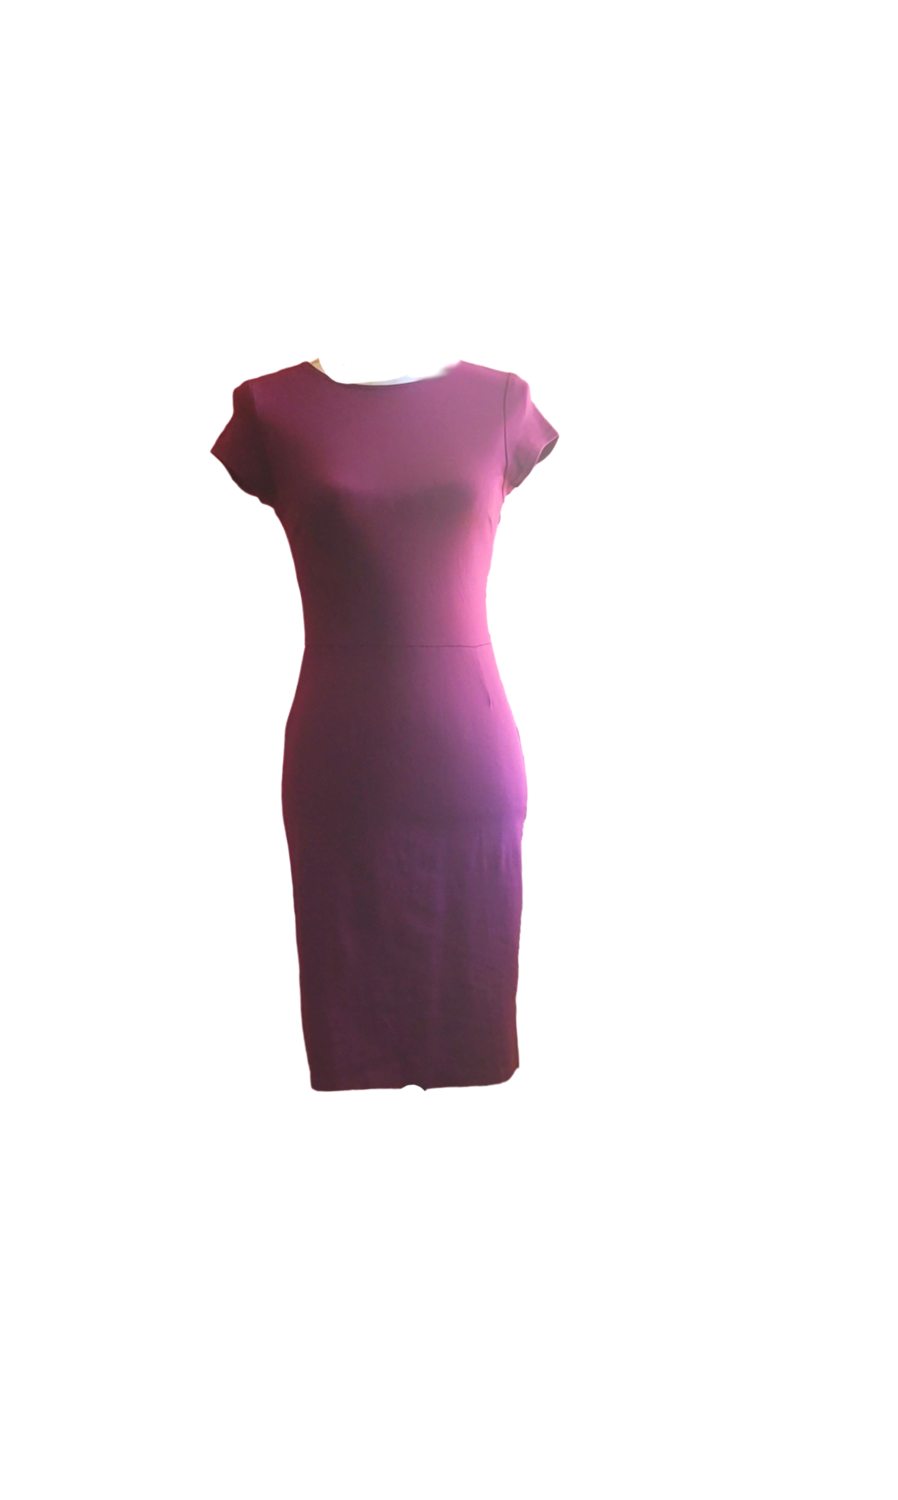 Audrey' Vintage Corporate Clarity 50's Girls Dress Bodycon